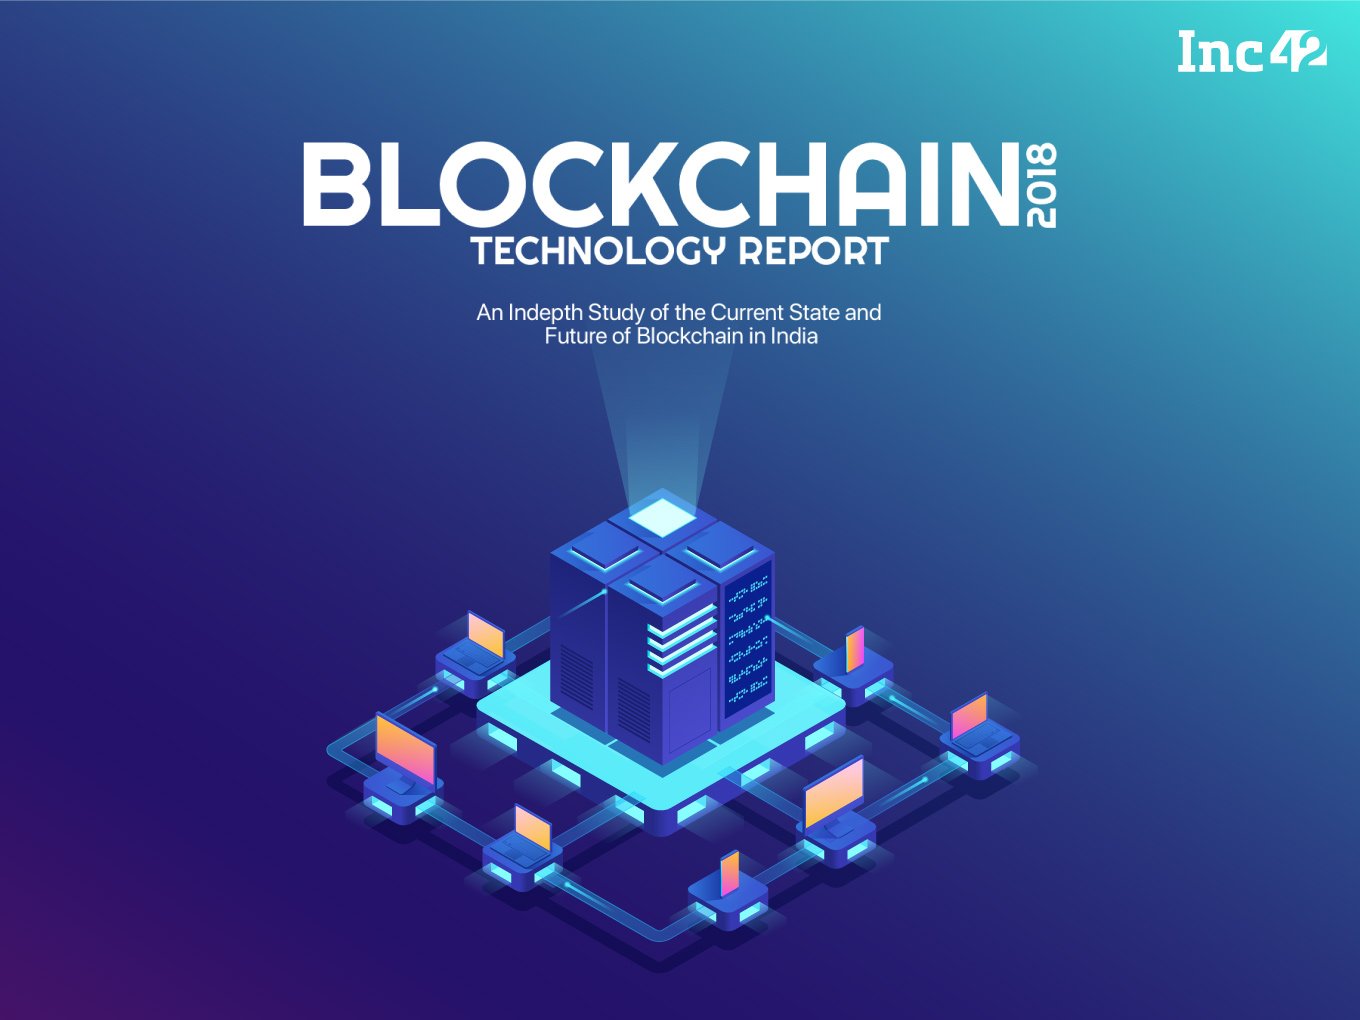 Coming Up: Inc42 Blockchain Technology Report 2018 To Decode The Hottest Technology For Both Pros And Noobs